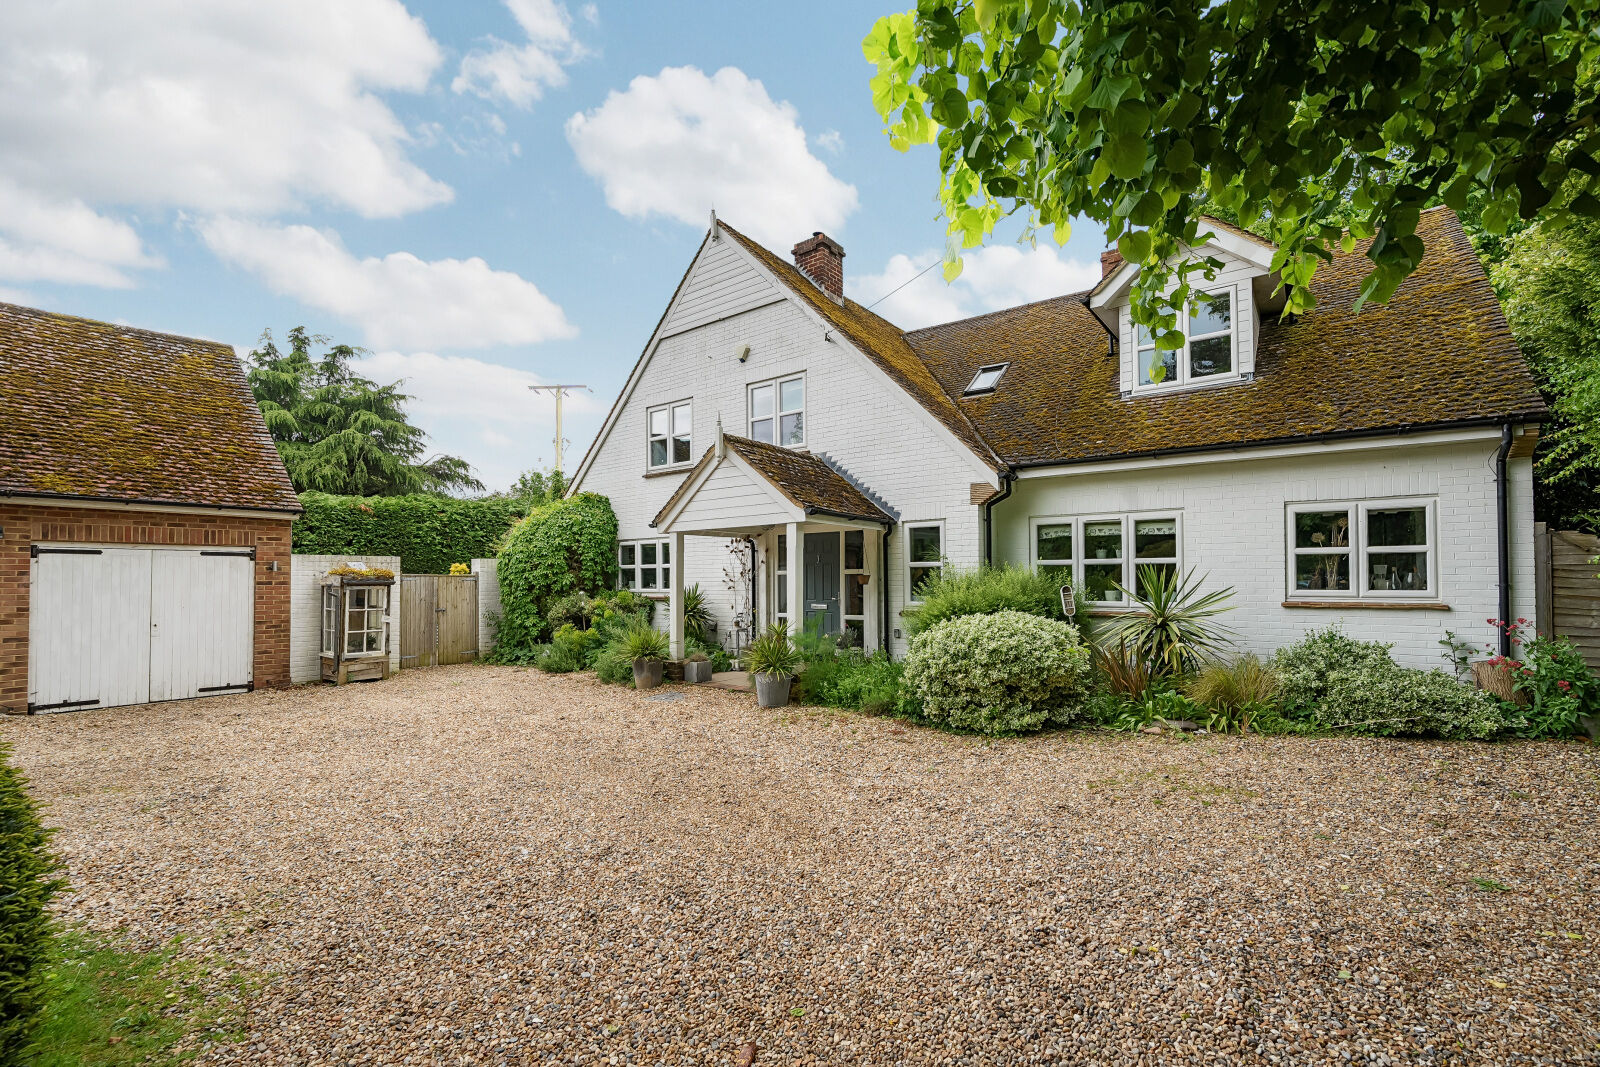 5 bedroom detached house for sale Peppard Common, Henley-on-Thames, RG9, main image